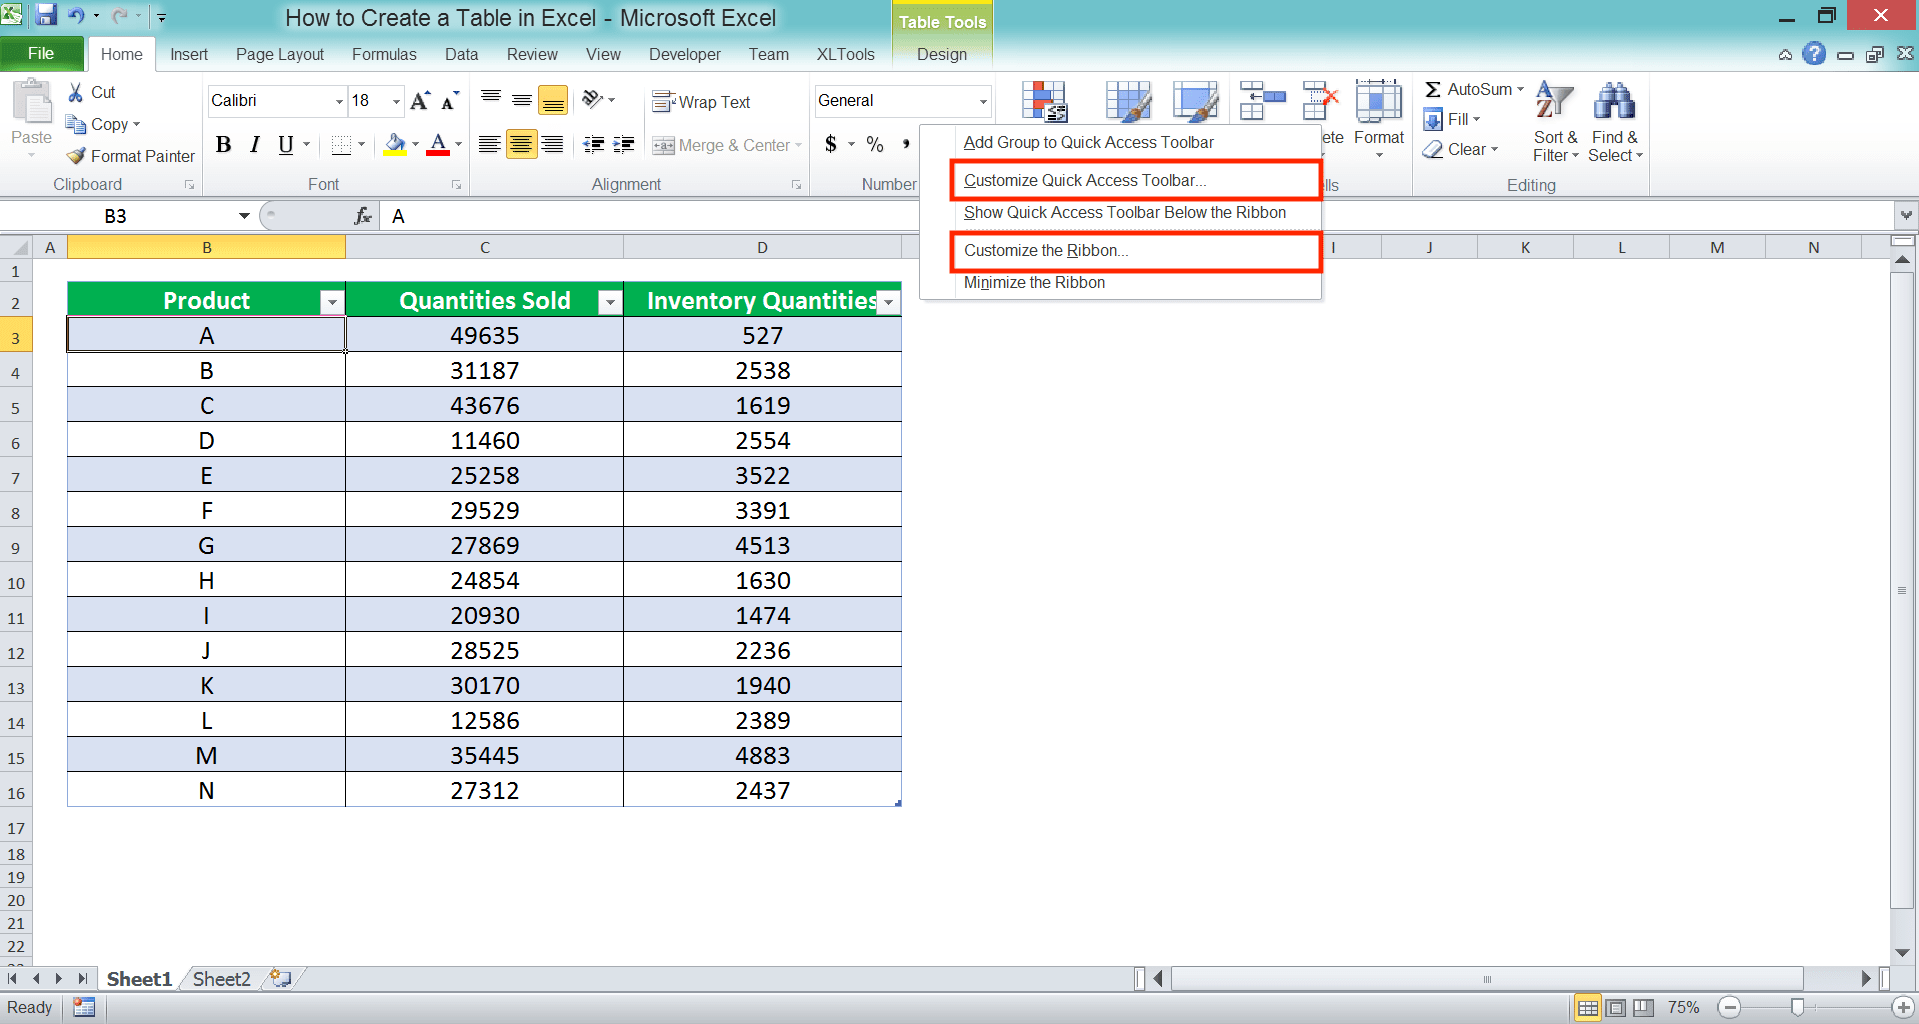 How to Make a Table in Excel - Screenshot of the Customize Quick Access Toolbar... and Customize the Ribbon... Choices Locations